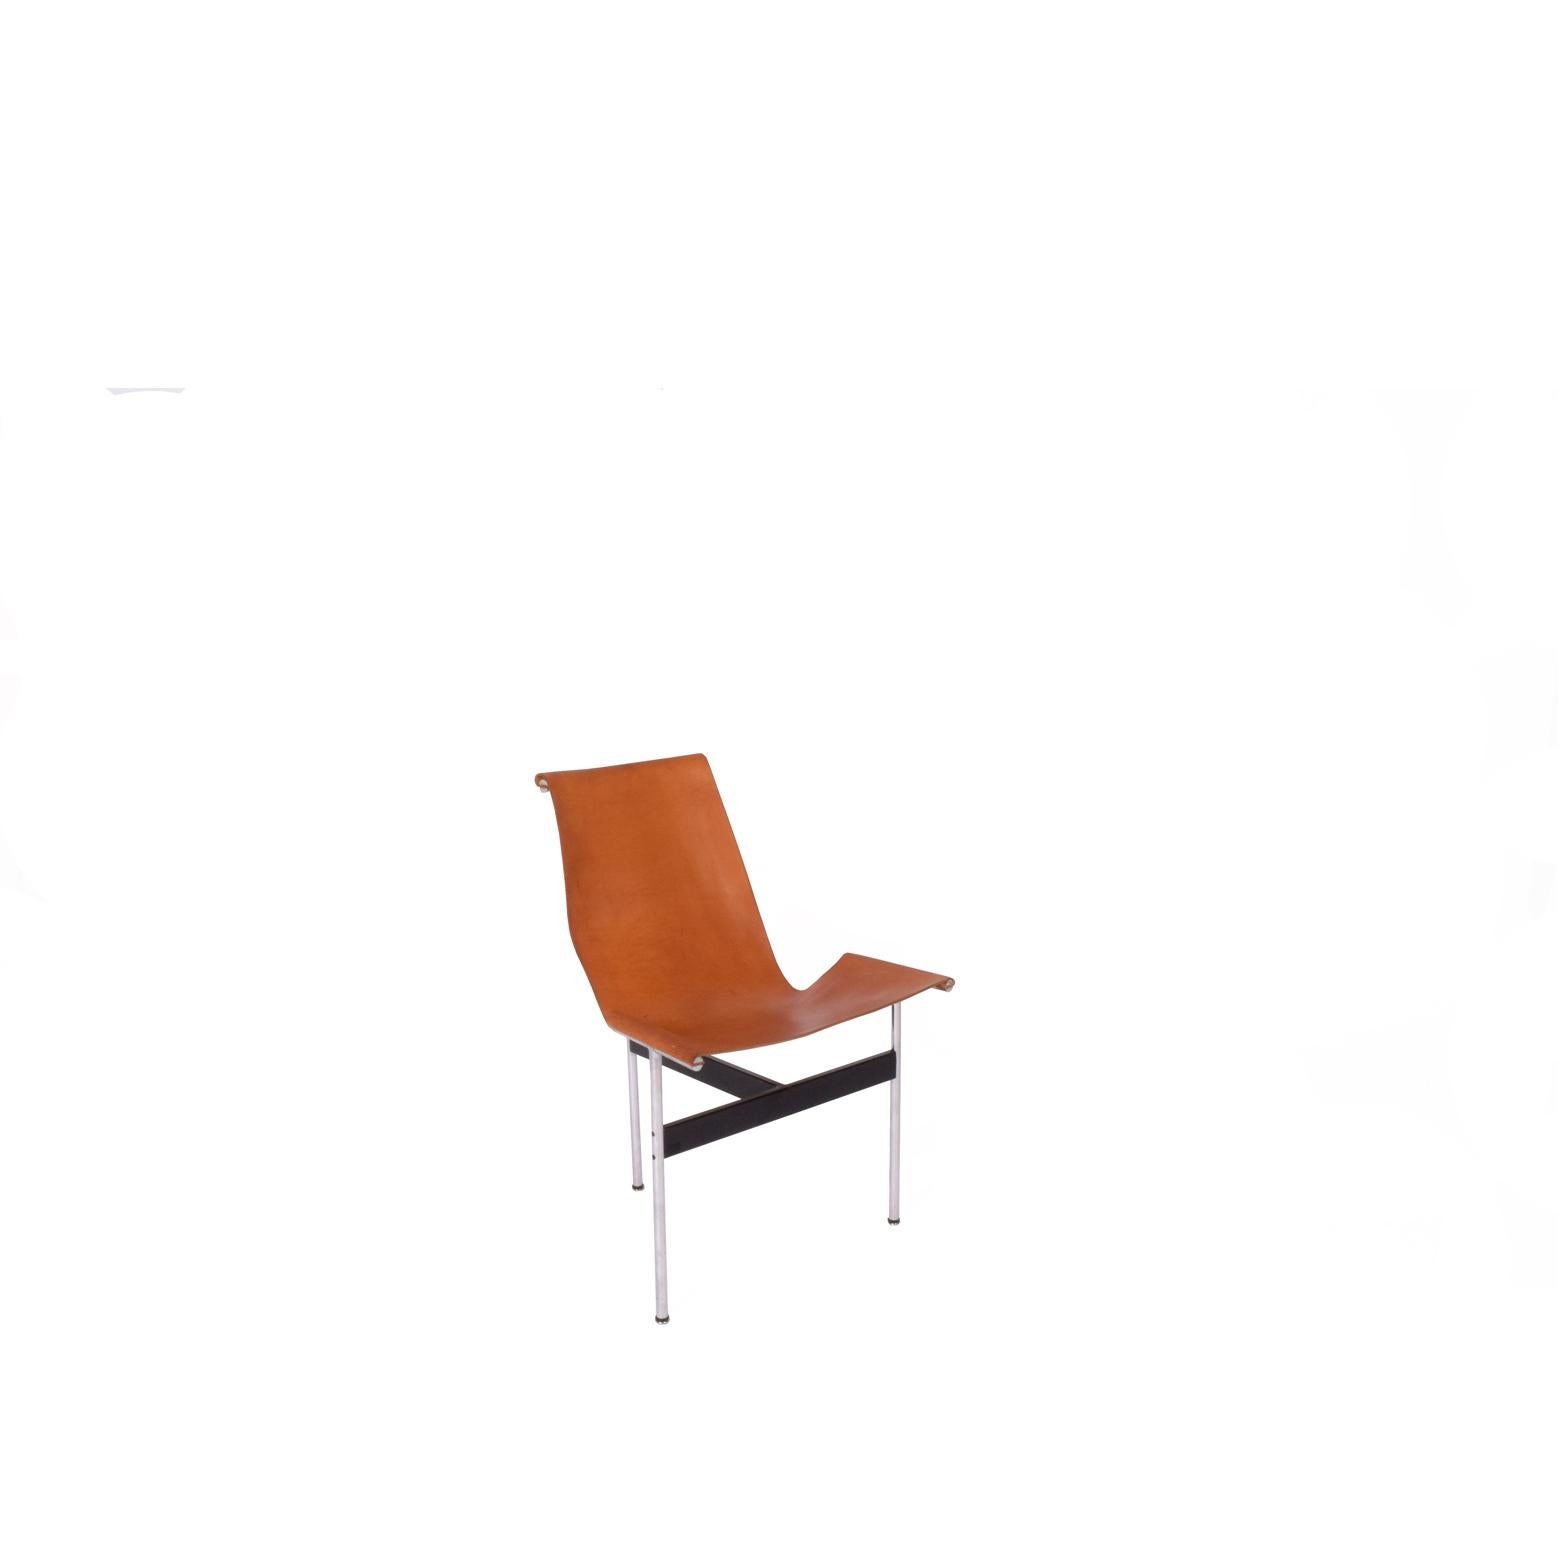 3-LC side chair chrome-plated tubular steel, painted steel,Natural saddle leather.